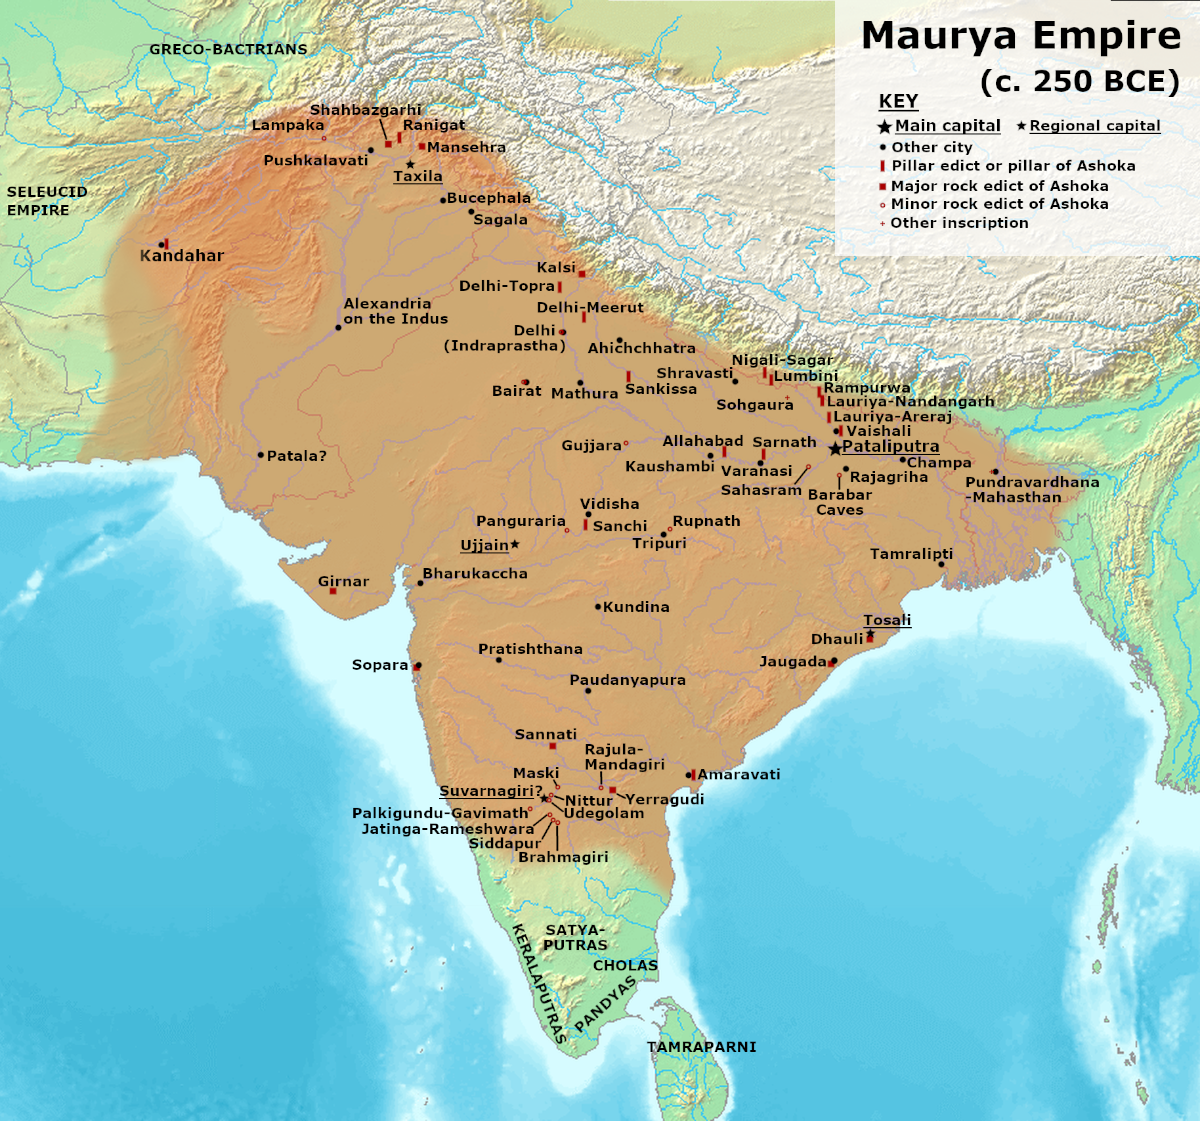 This is the standard "textbook" map of the Maurya Empire during Ashoka.